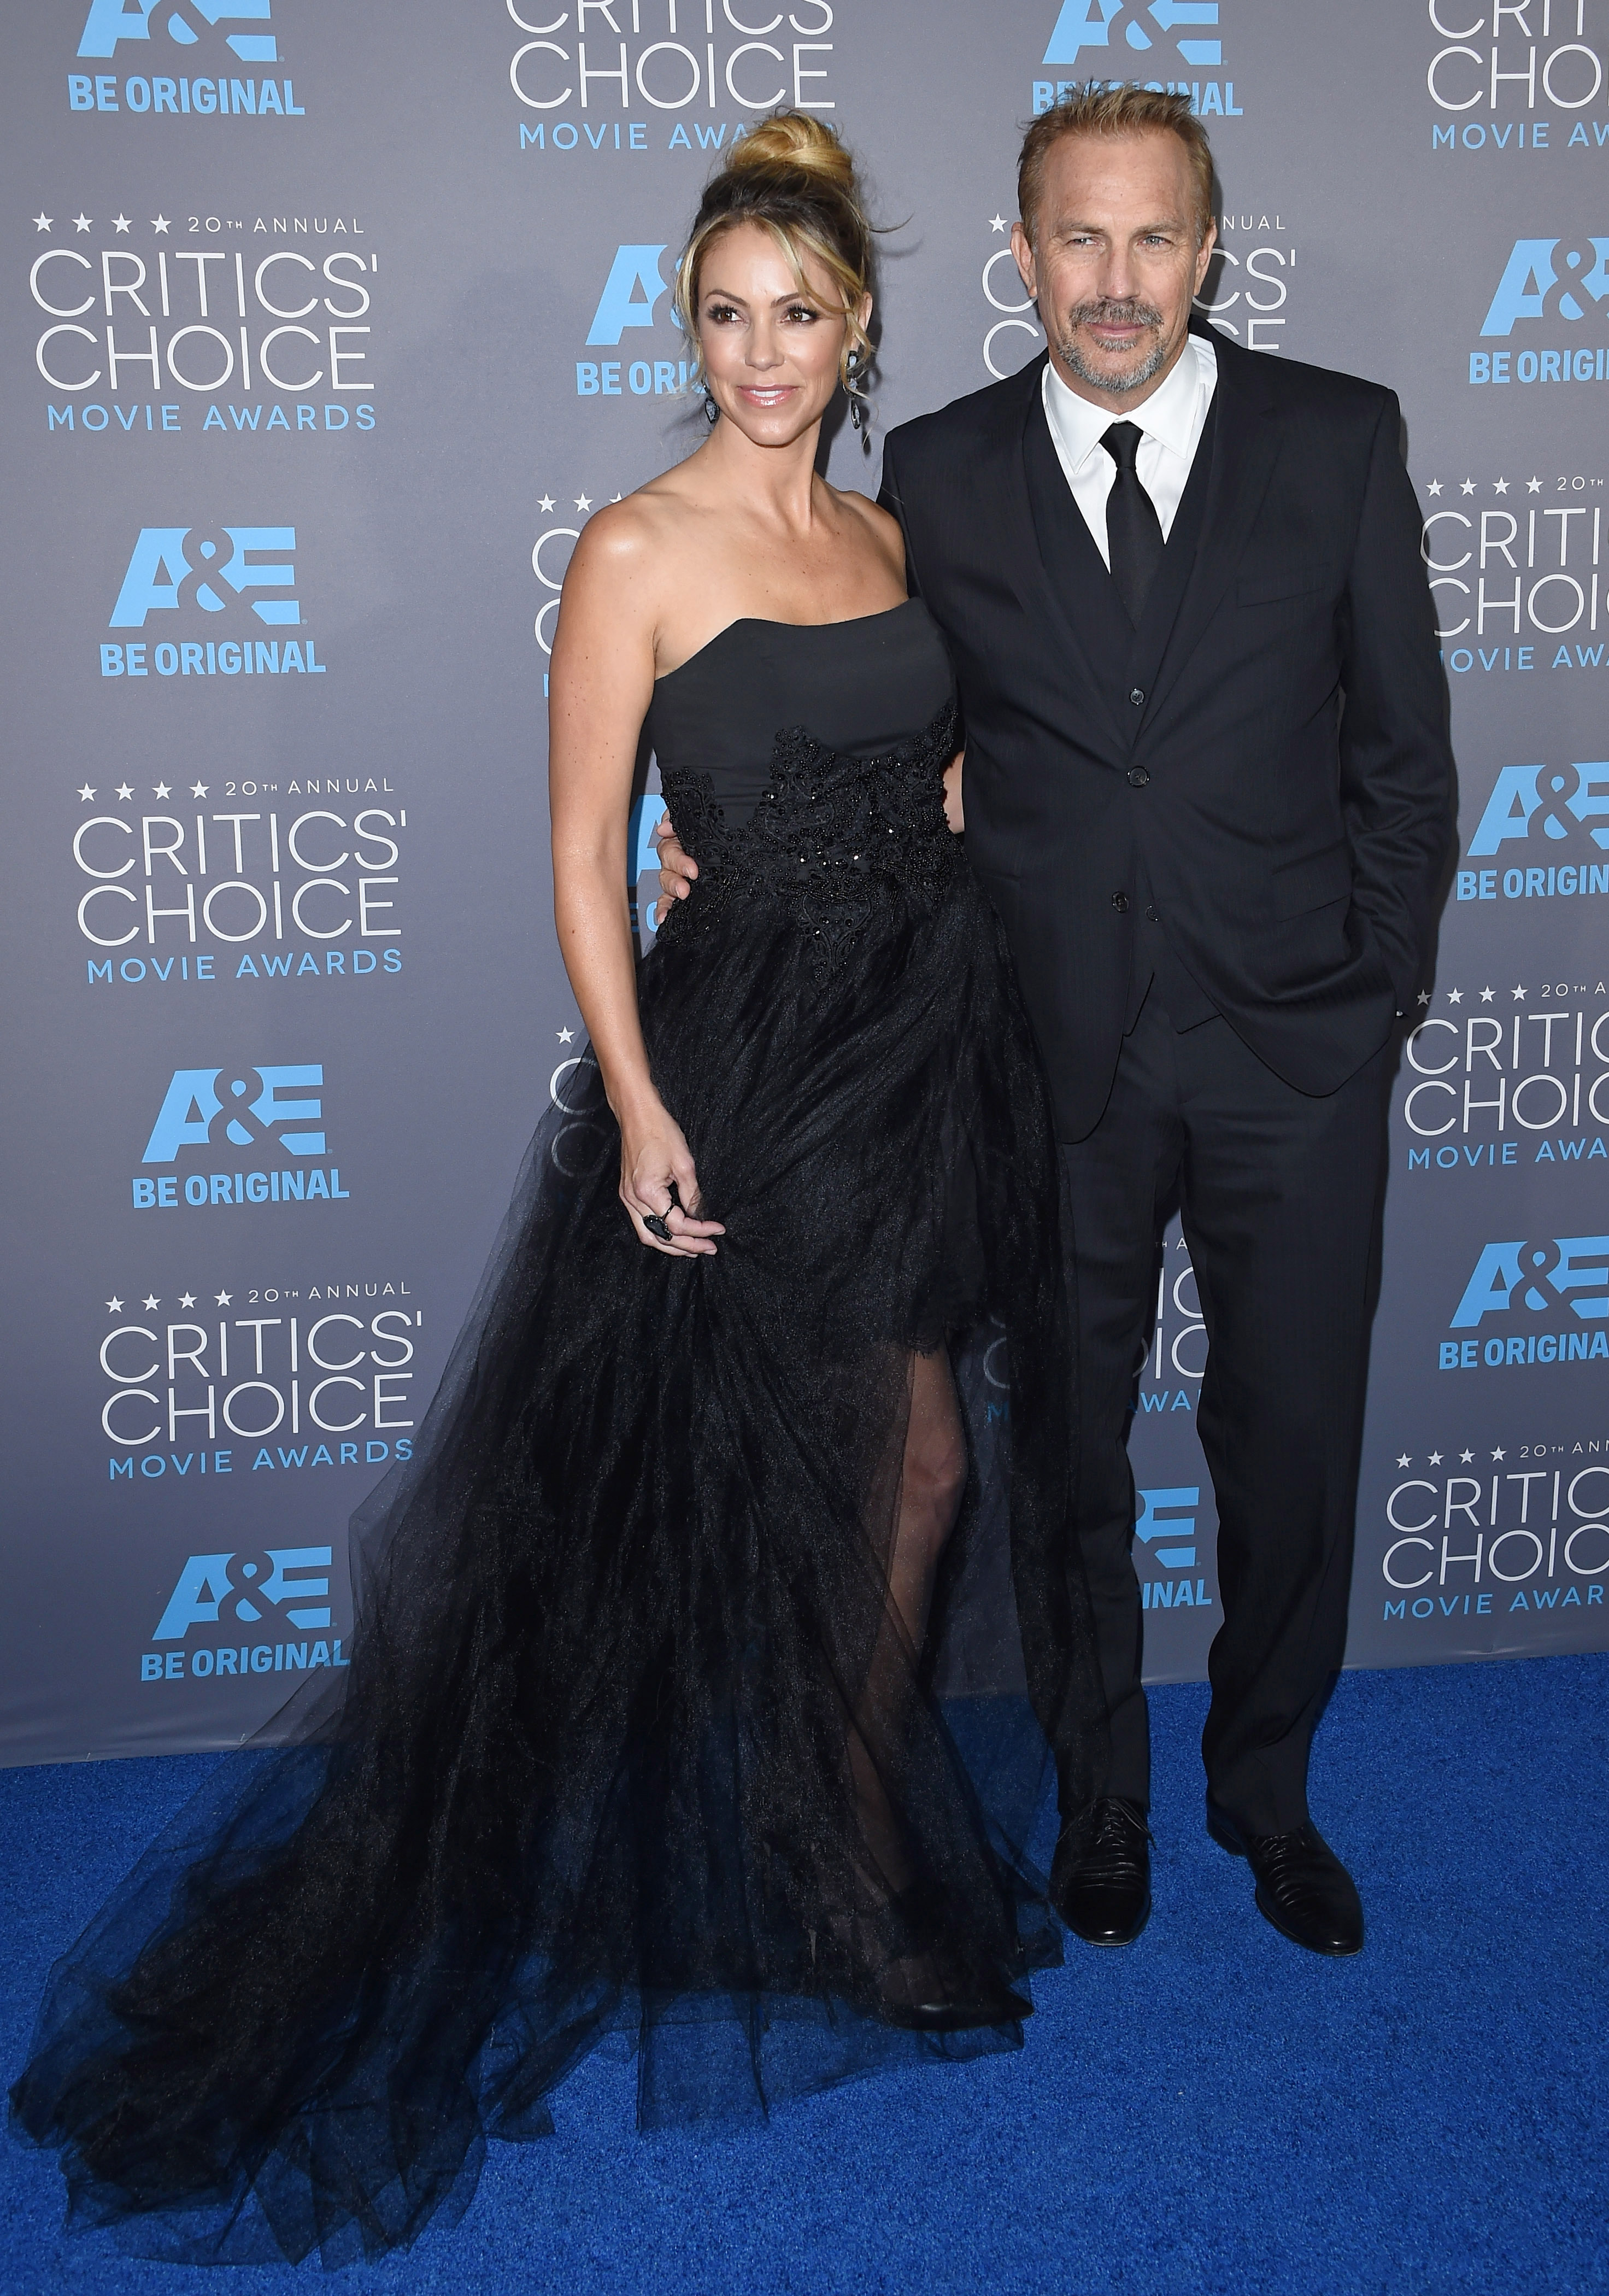 Kevin Costner and Christine Baumgartner at the 20th Annual Critics' Choice Movie Awards in Los Angeles, California, on January 15, 2015. | Source: Getty Images